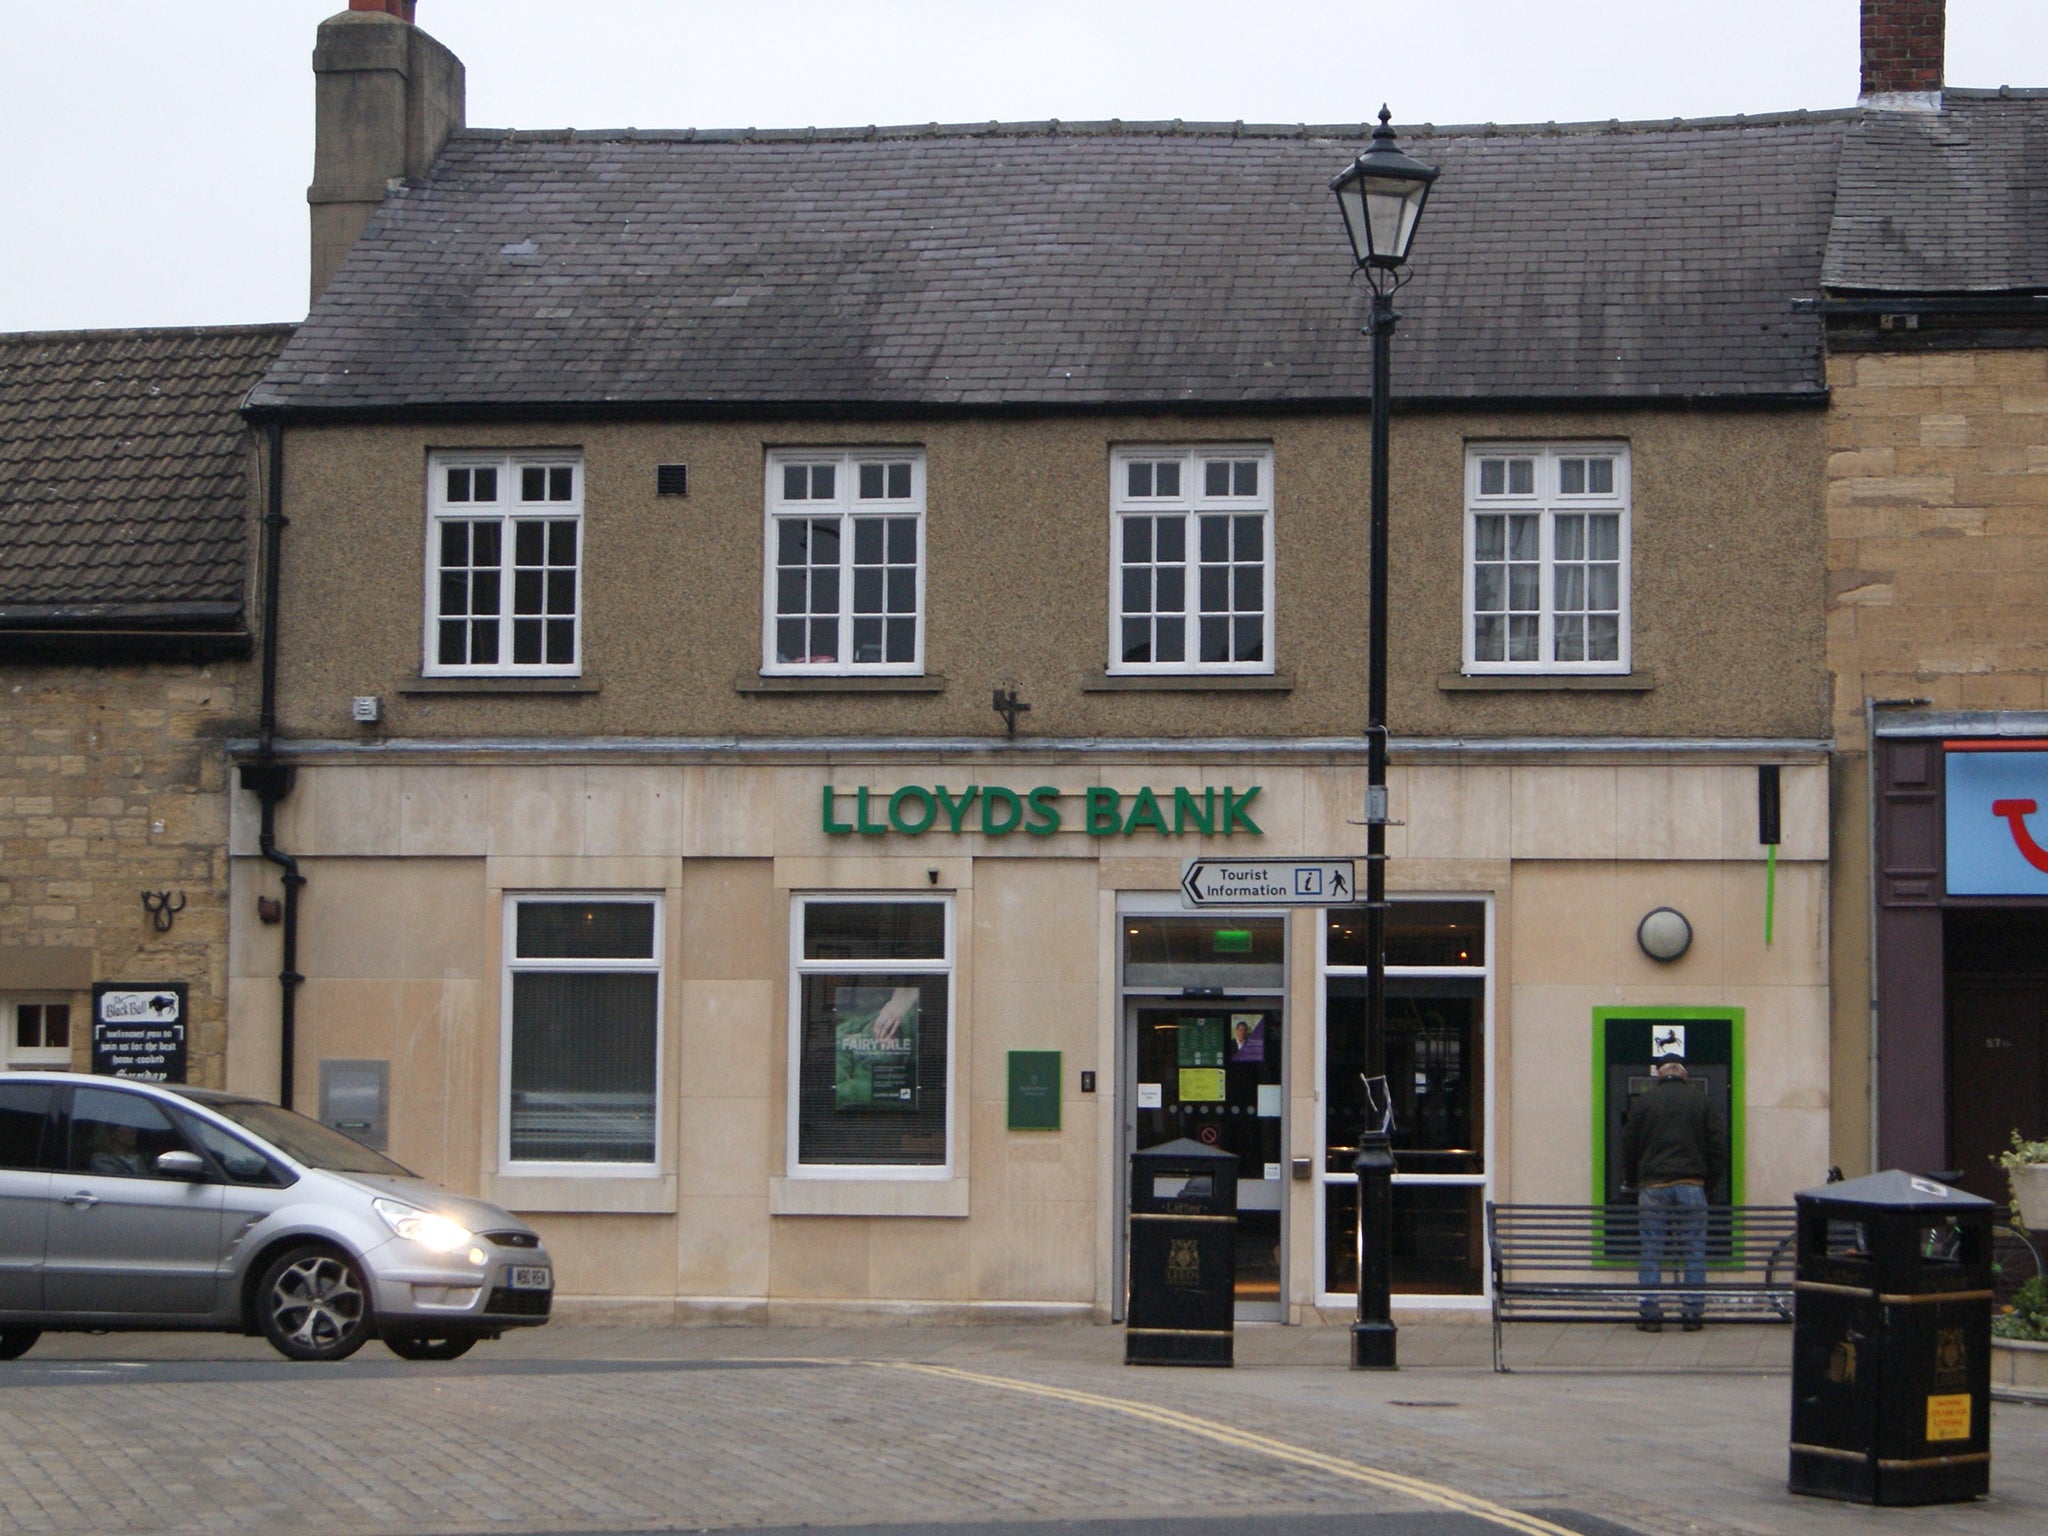 In 2014, 243 small and rural bank branches were closed down